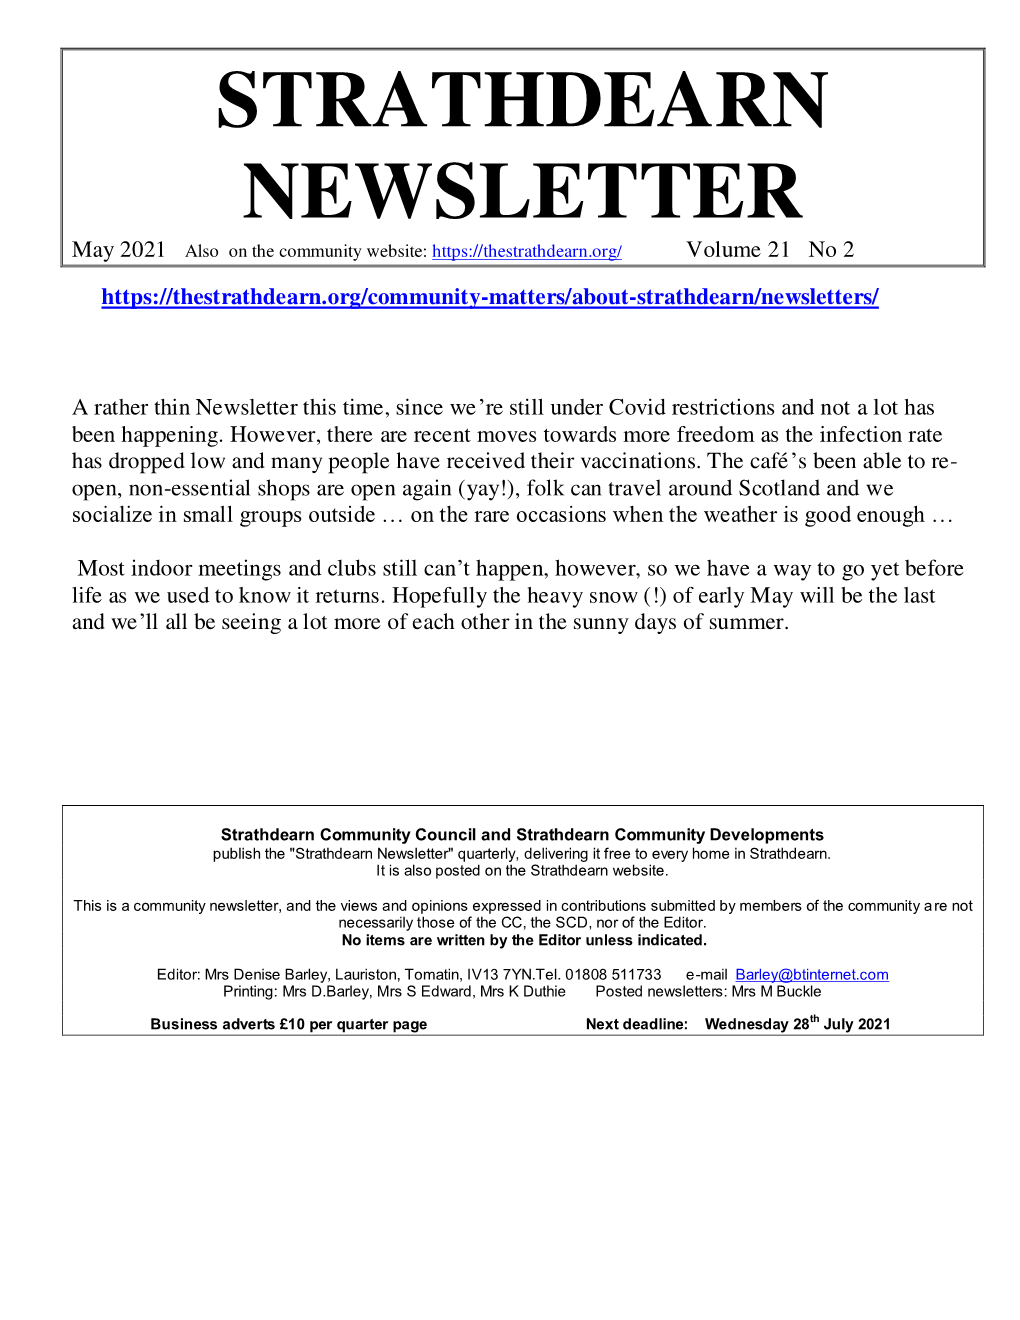 STRATHDEARN NEWSLETTER May 2021 Also on the Community Website: Volume 21 No 2